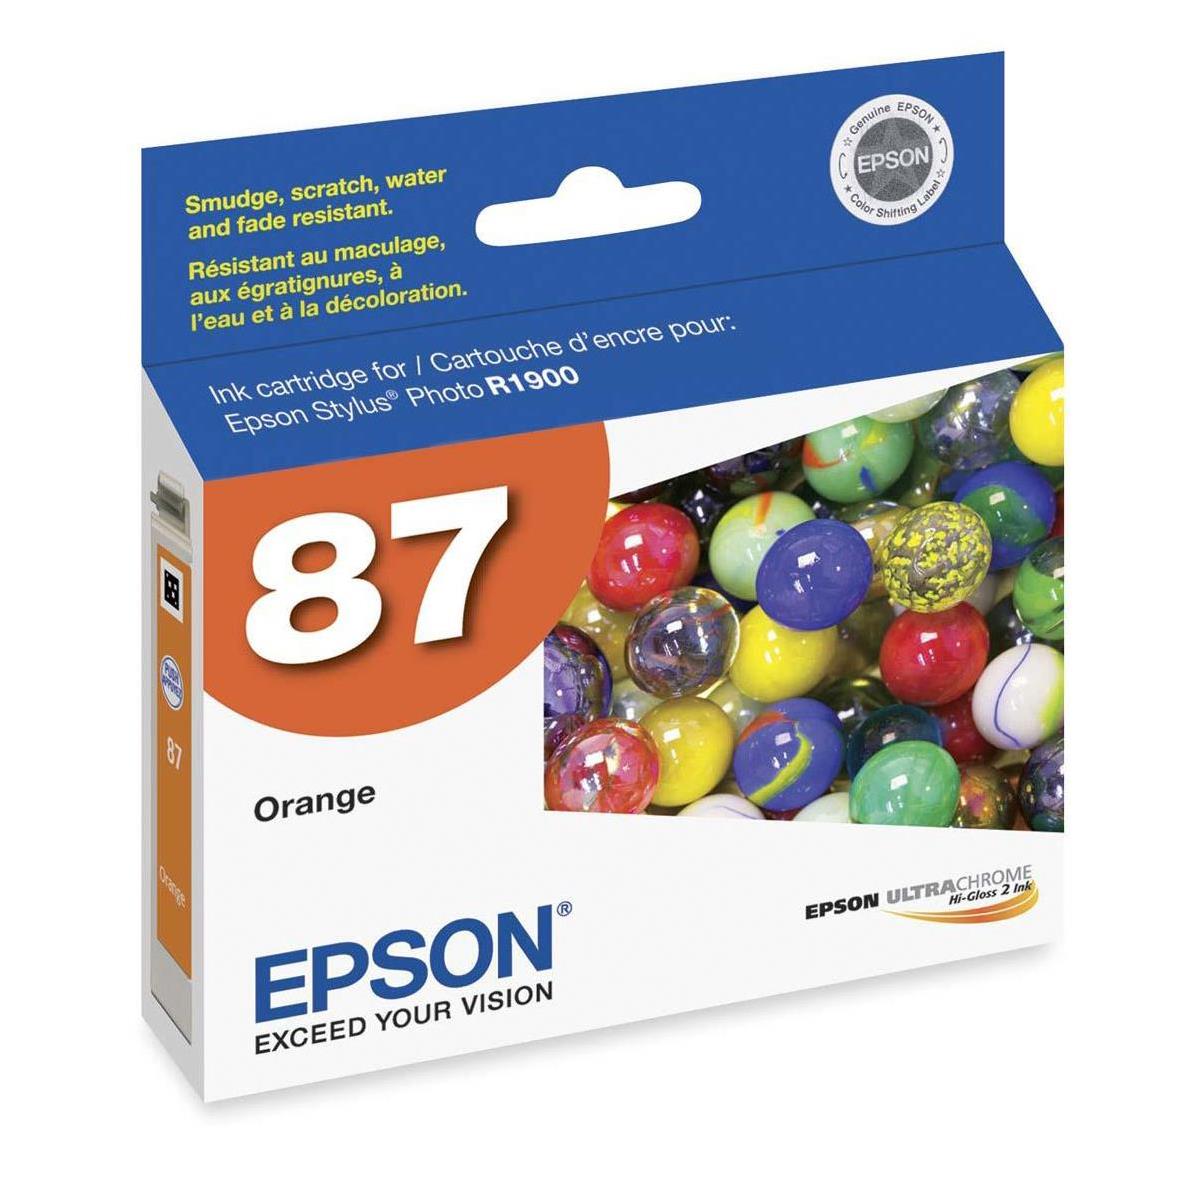 Image of Epson T087920 Cartridge for Stylus R1900